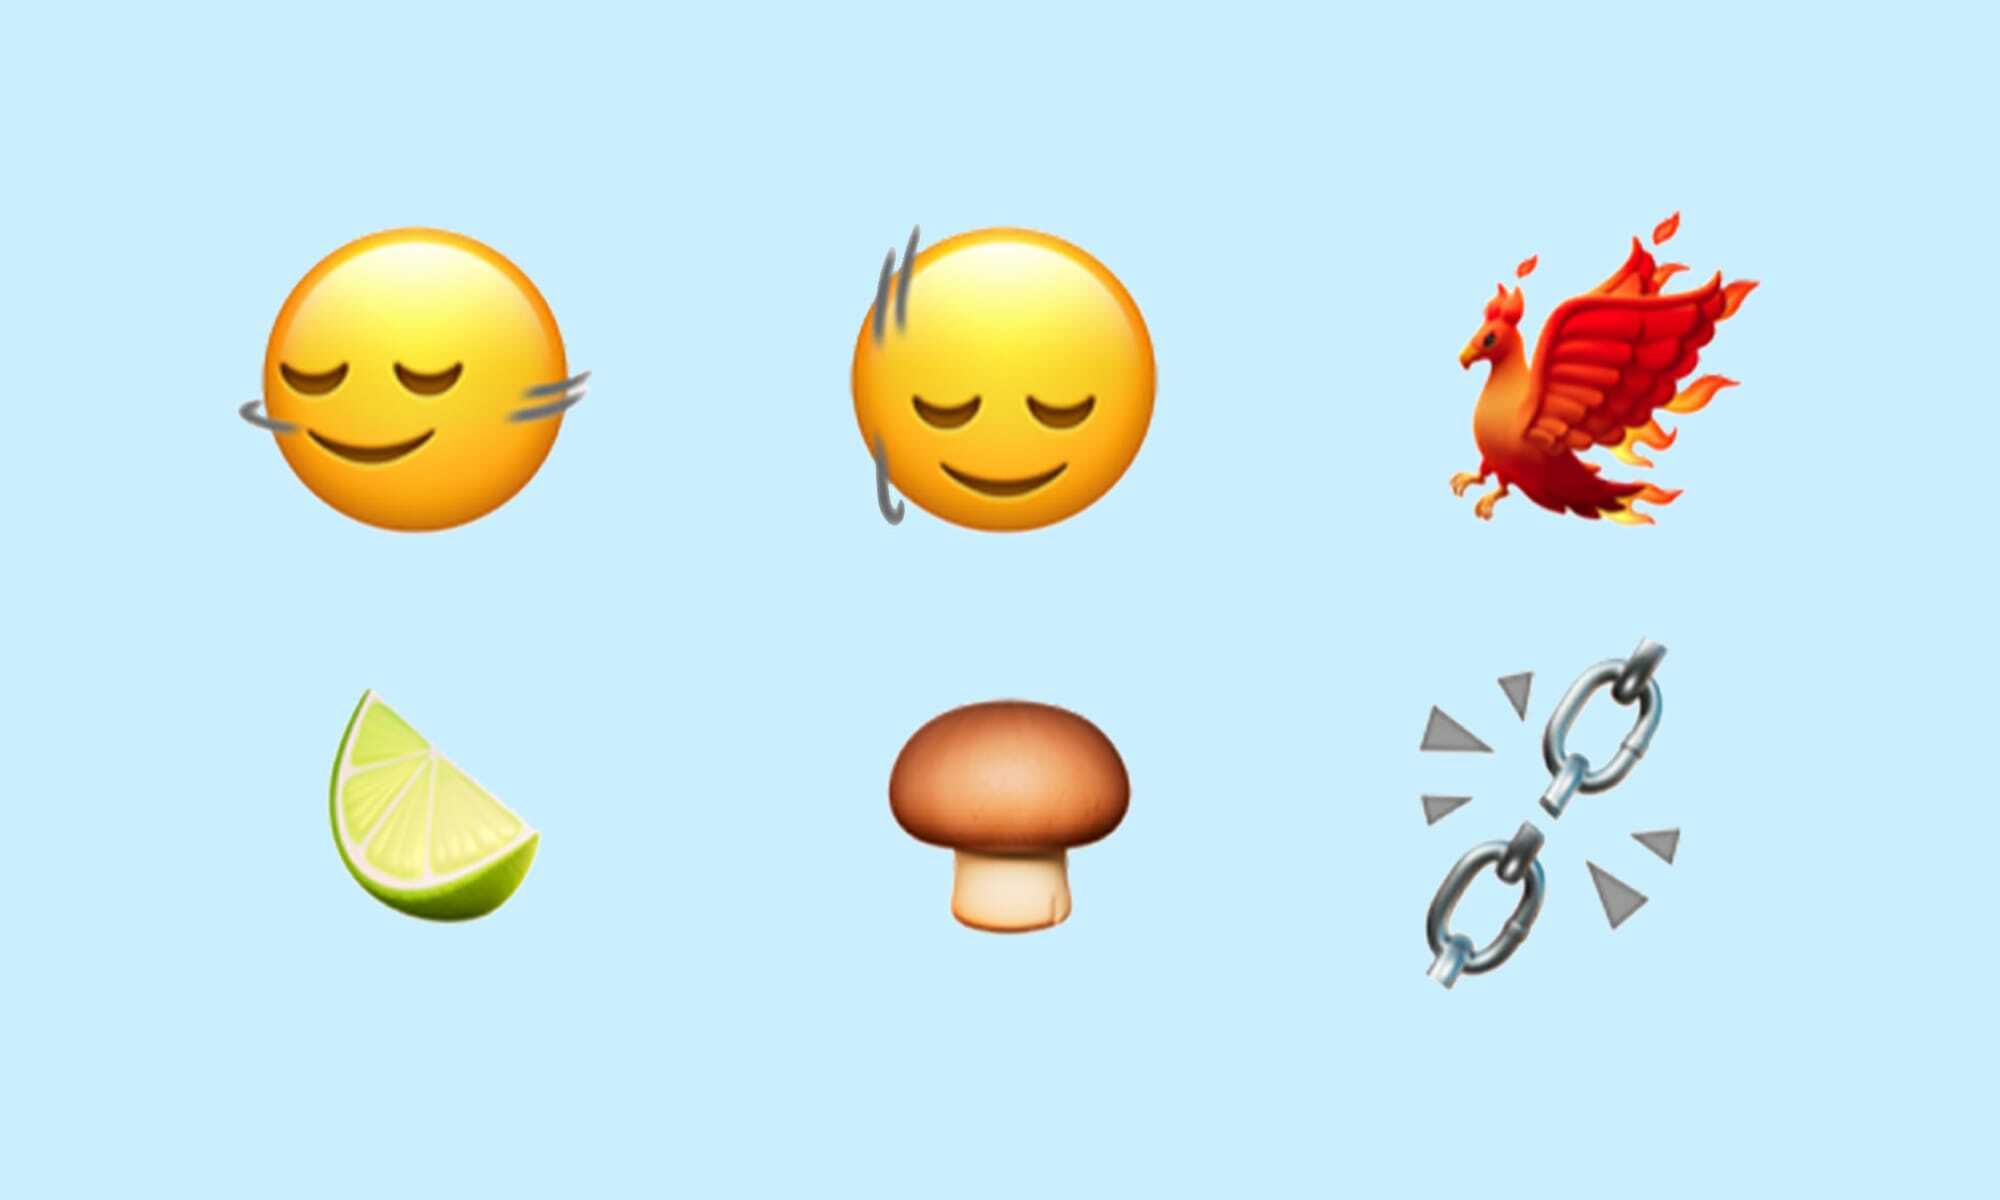 Six new emojis for iOS 17.4